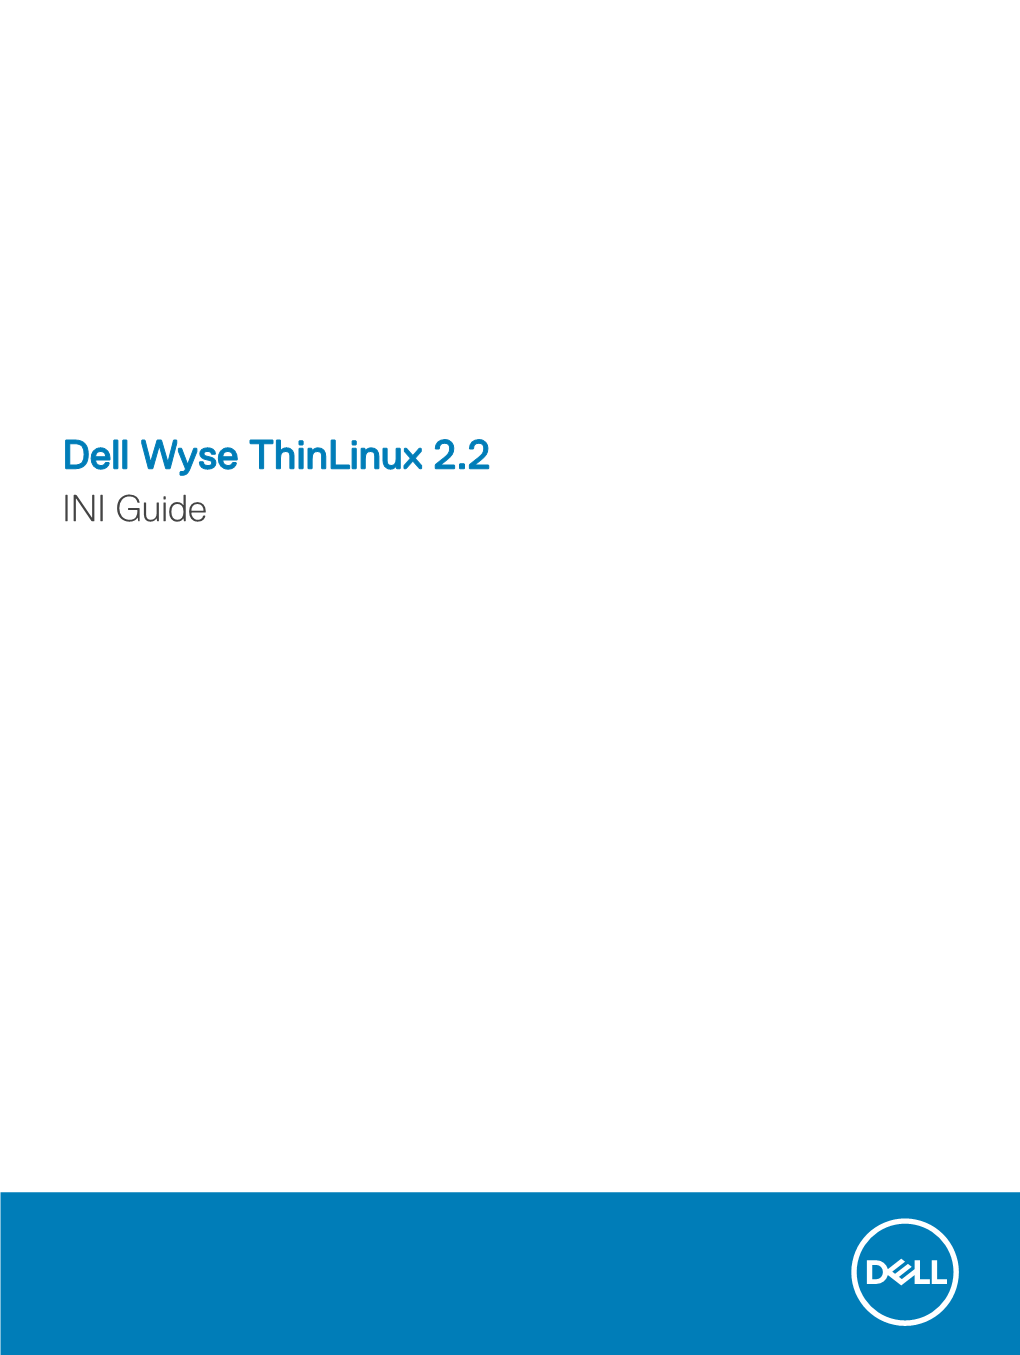 Dell Wyse Thinlinux 2.2 INI Guide Notes, Cautions, and Warnings